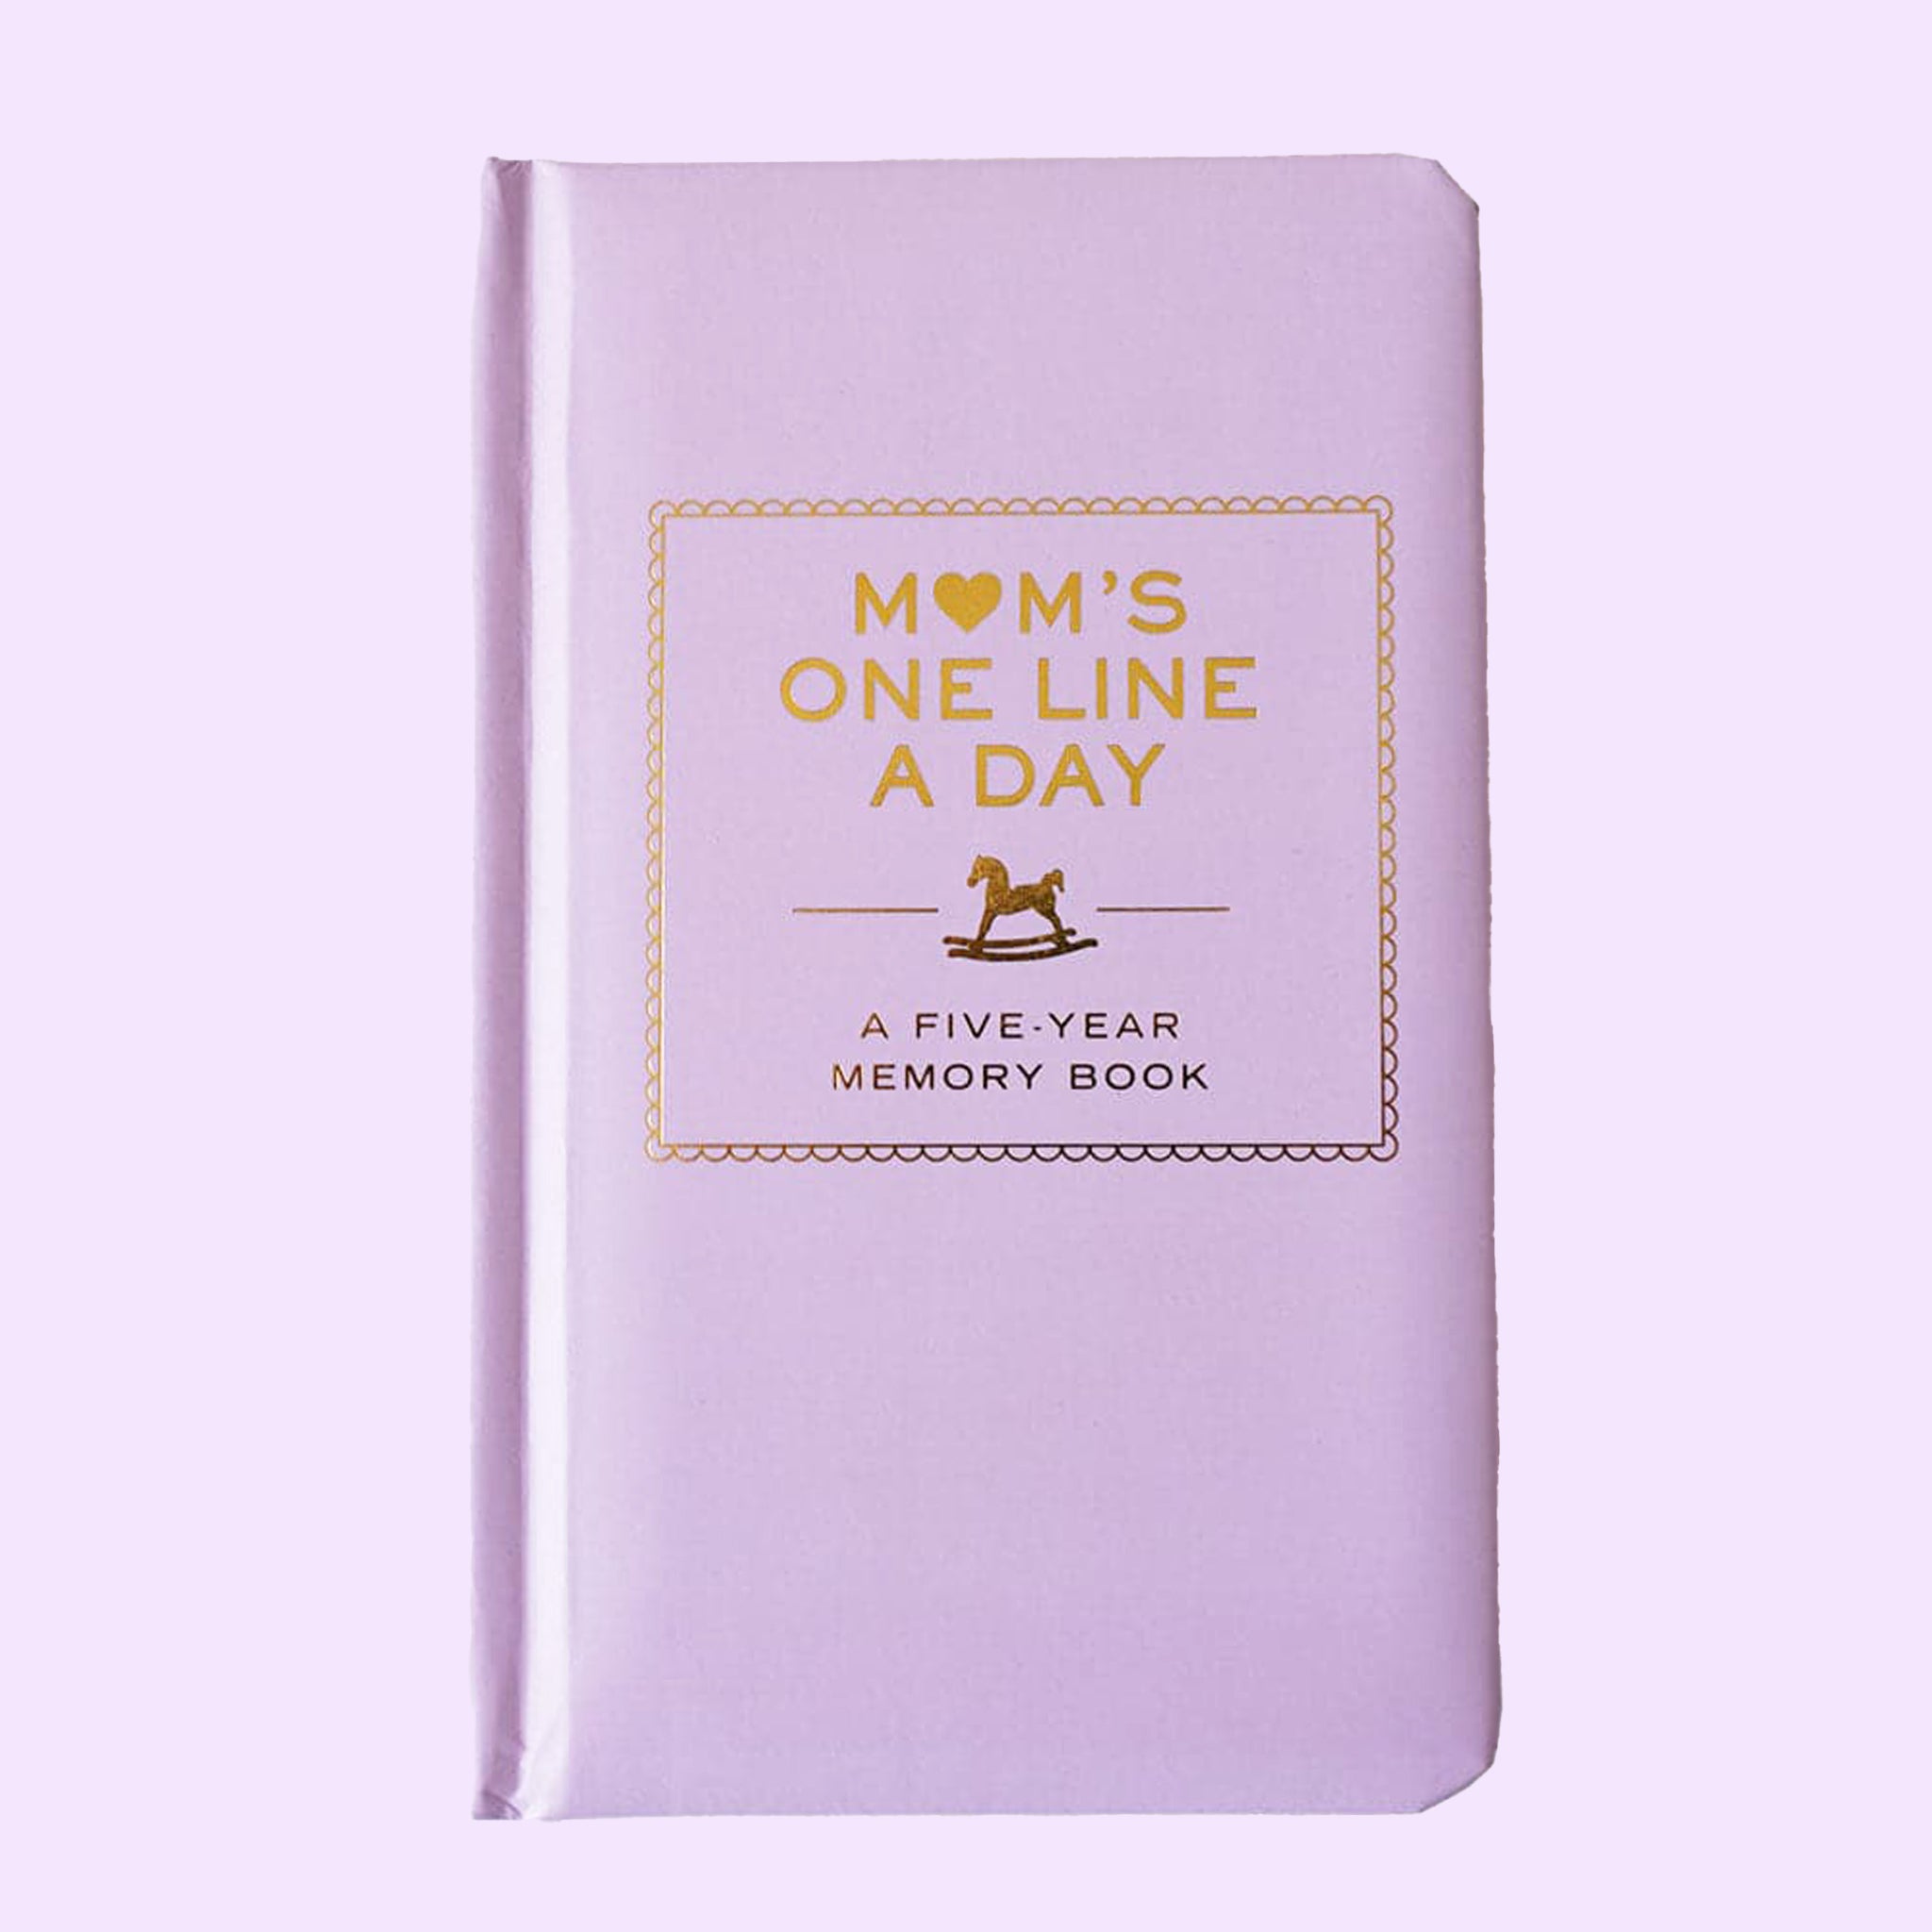 High quality, lavender memory book reading 'Mom's one line a day, a five-year memory book' in gold foil lettering across the padded cover.